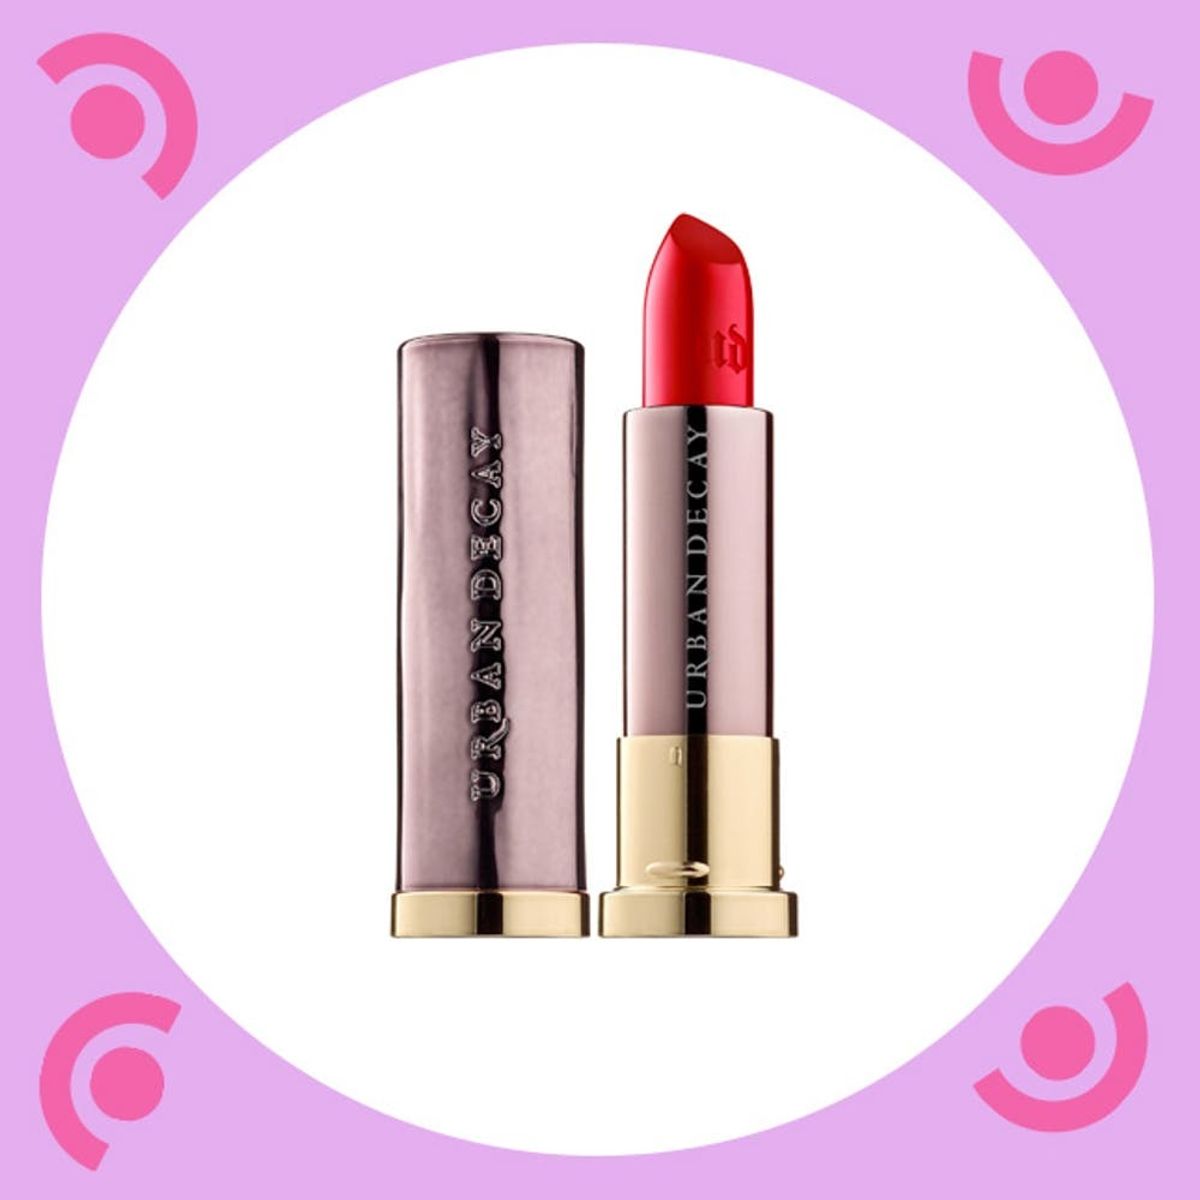 Gloss, Stain, or Stick: How to Find the Best Lip Product for Valentine’s Day